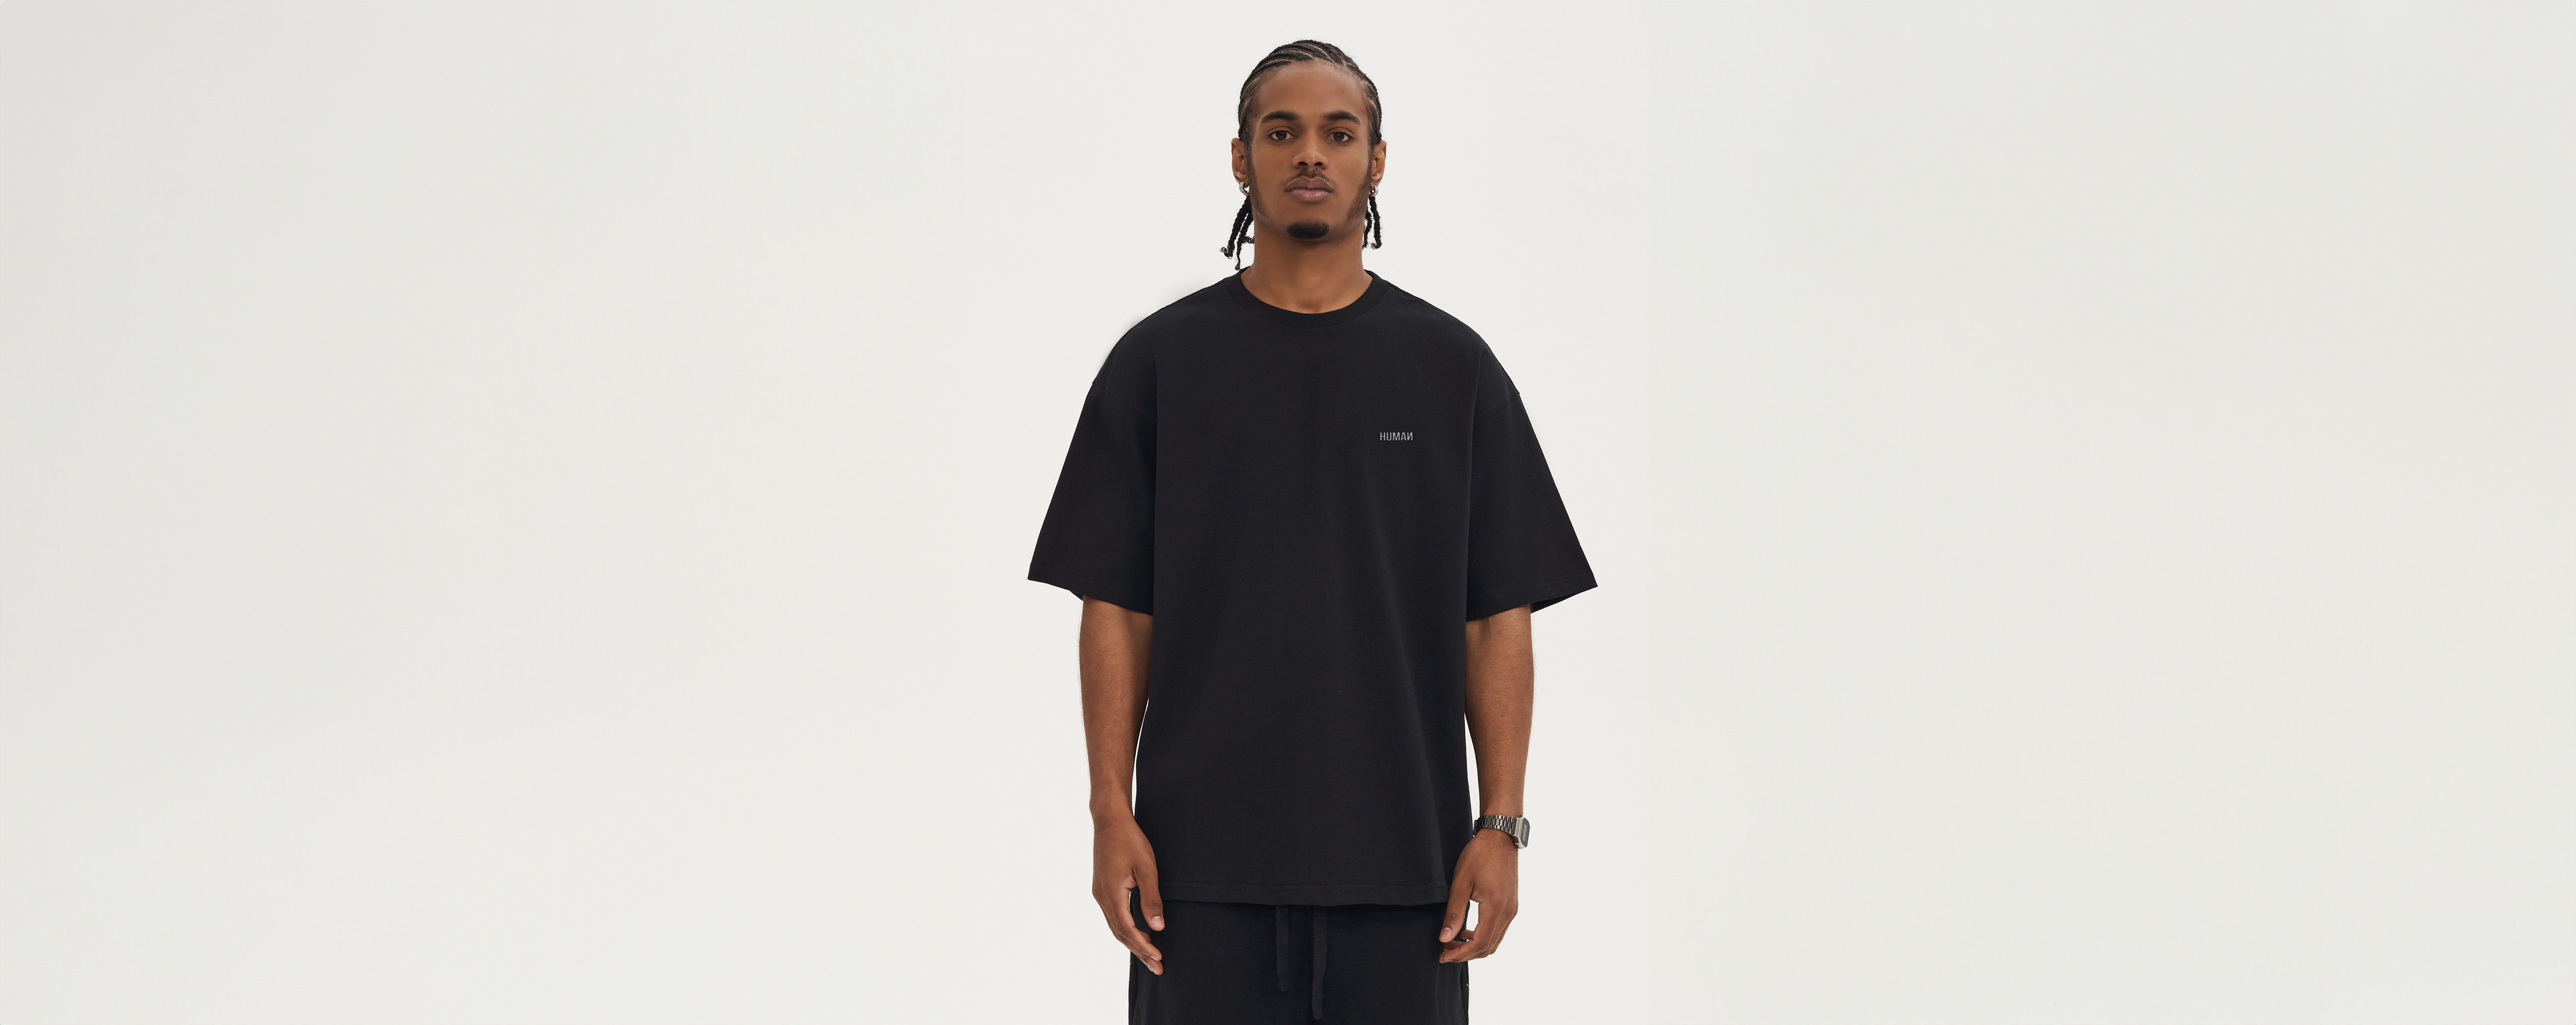 Black male wearing an oversized human of the future t-shirt